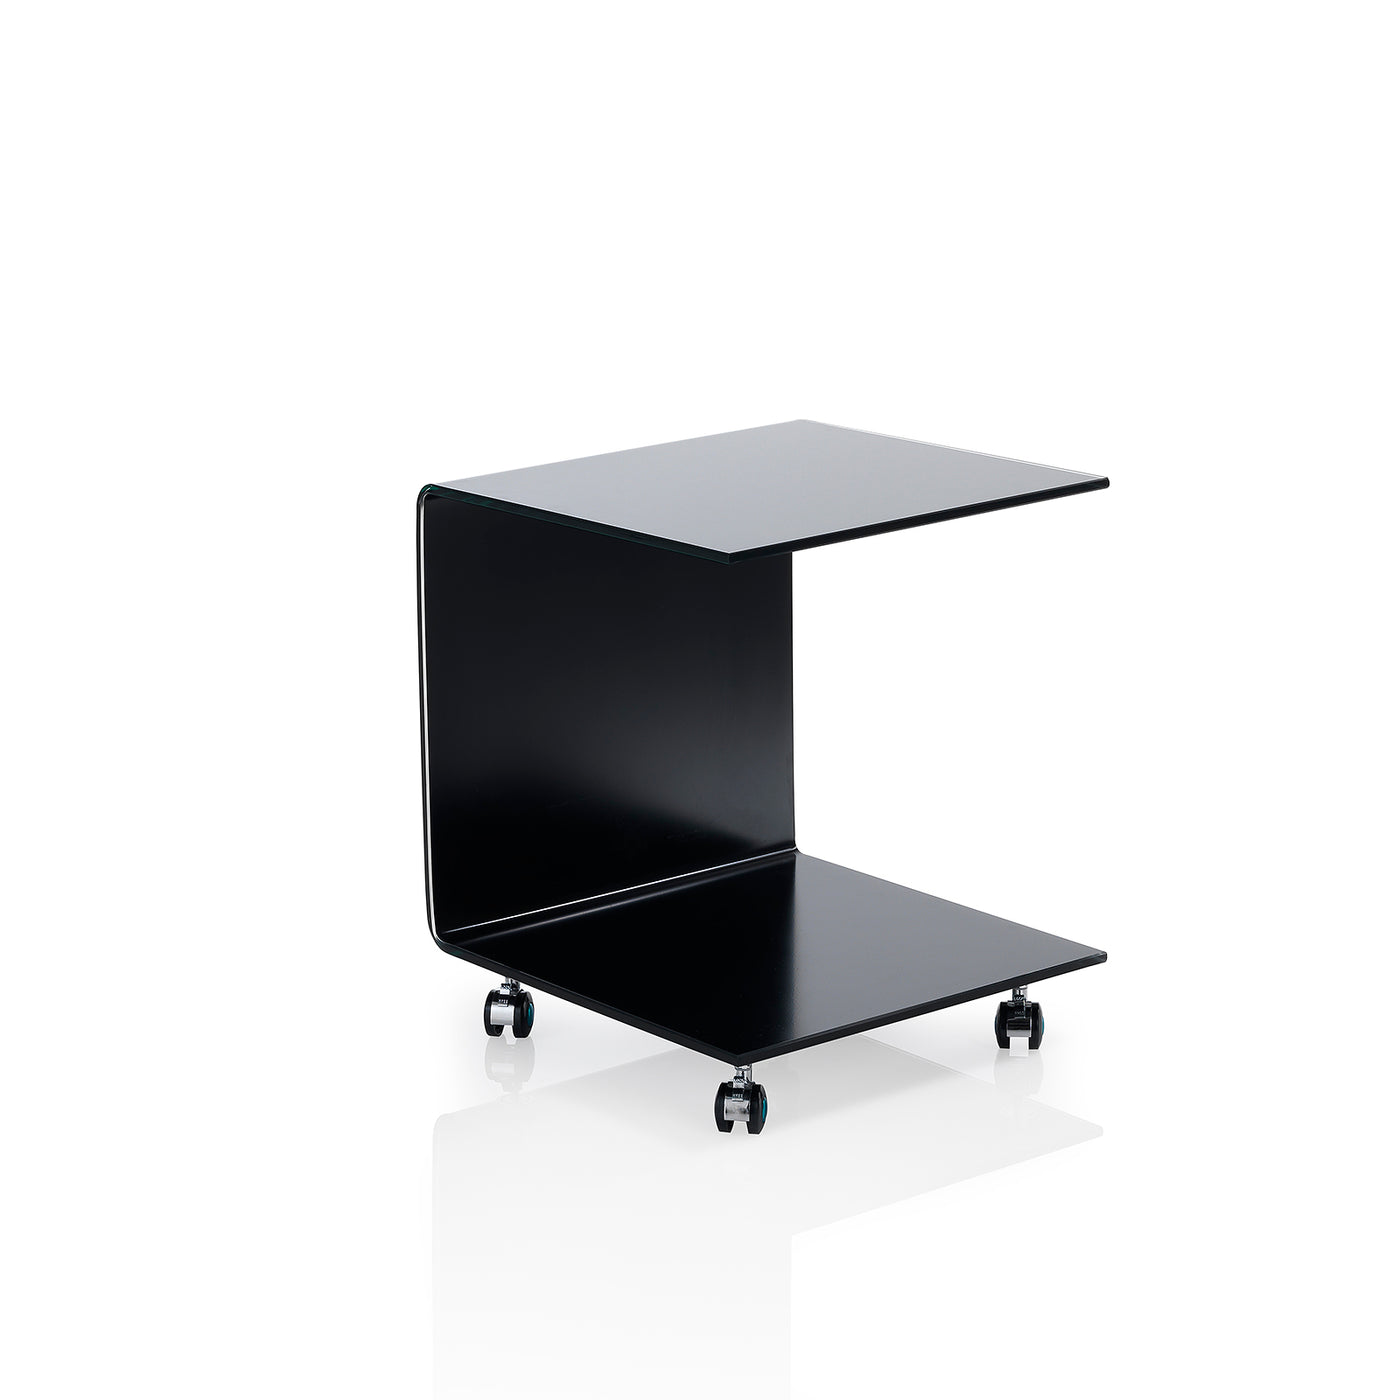 SNAPPY black coffee table with wheels